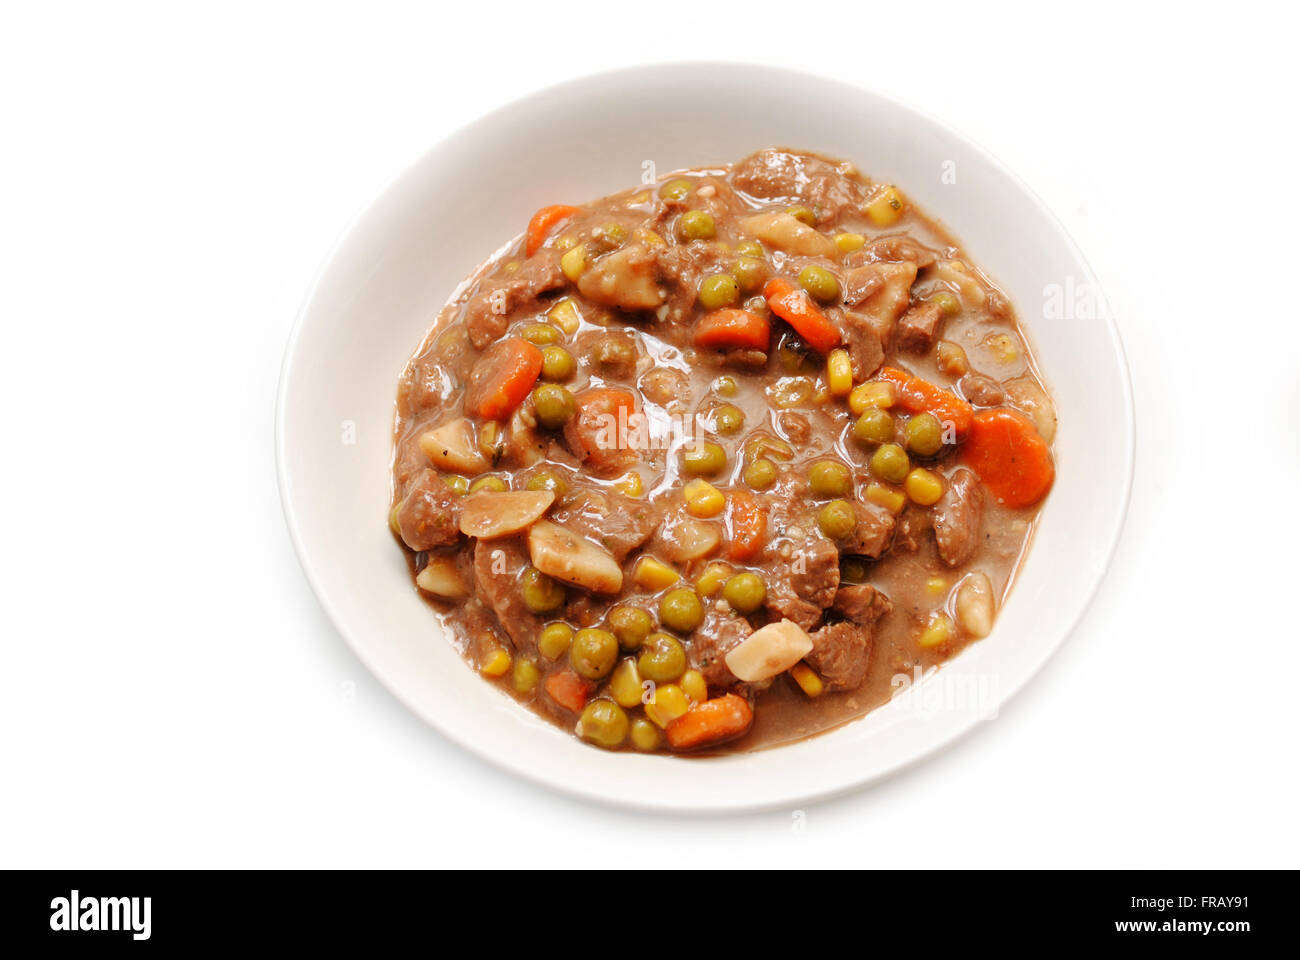 Hearty Beef or venison Stew With Healthy Vegetables Stock Photo